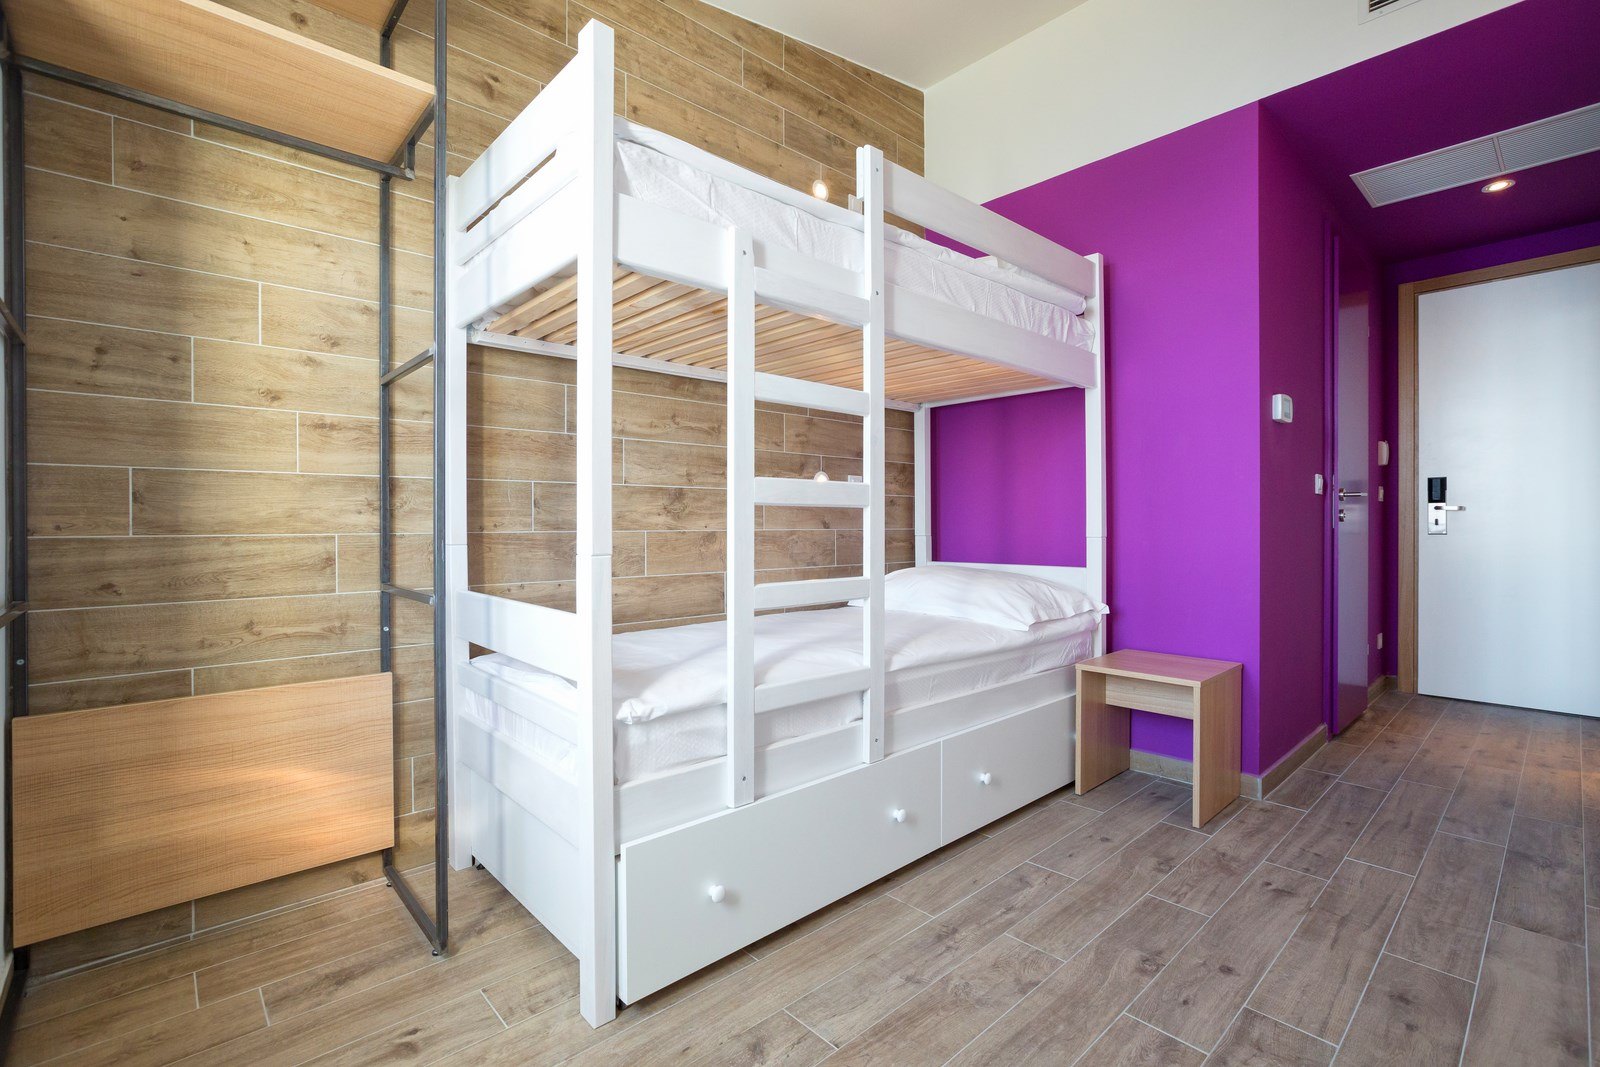 Hostel Link - Twin Room with Bunk Beds - Sea View